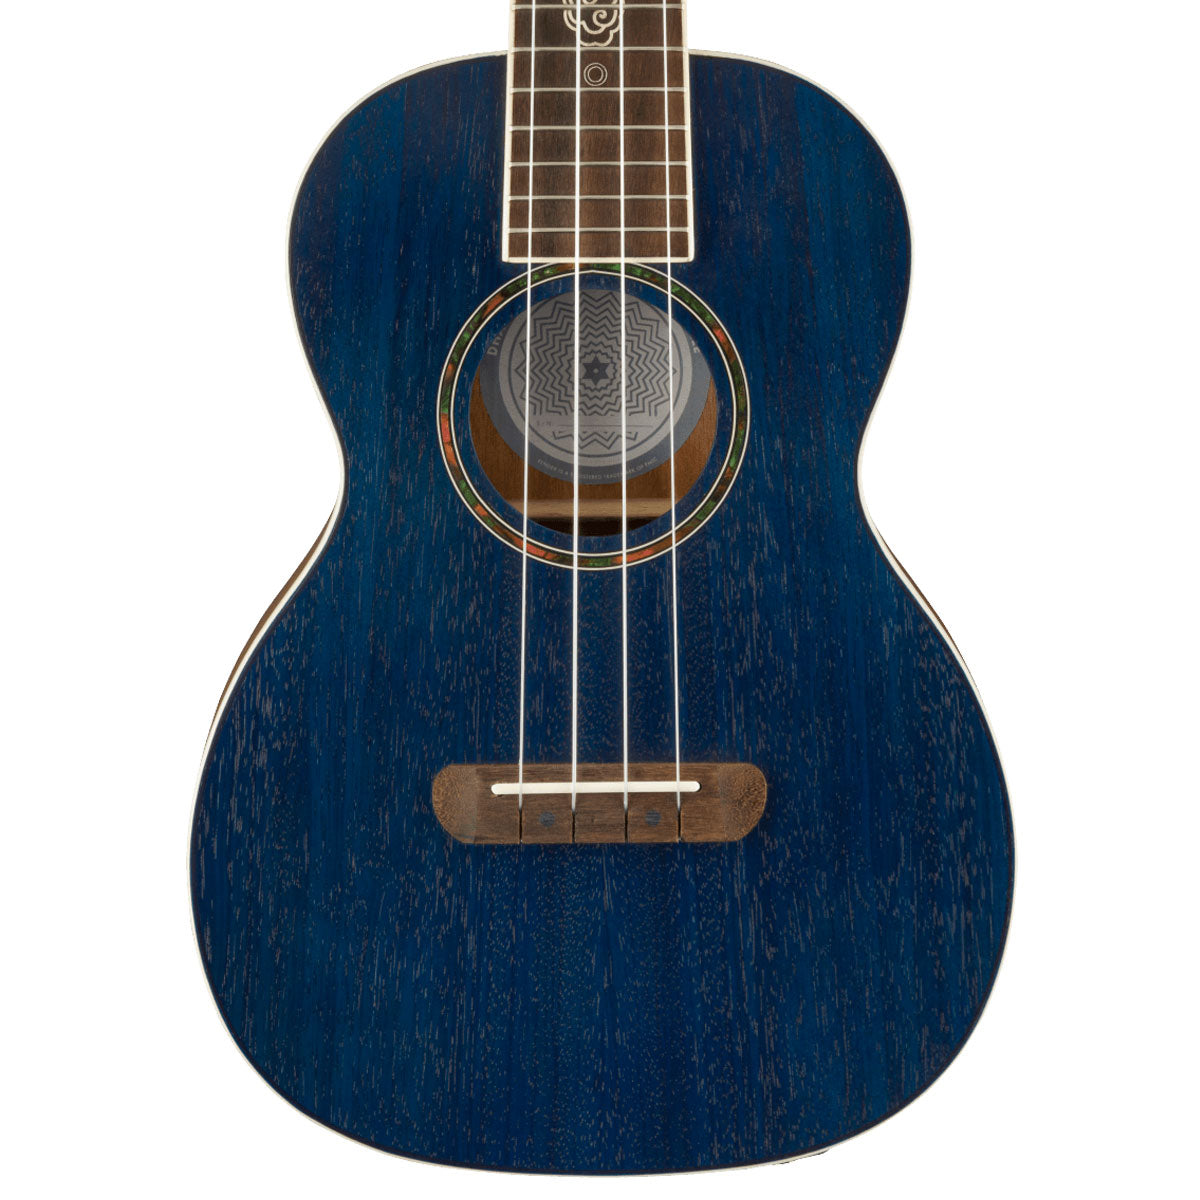 Close-up top view of Fender Dhani Harrison Signature Ukulele - Sapphire Blue showing body and portion of fretboard